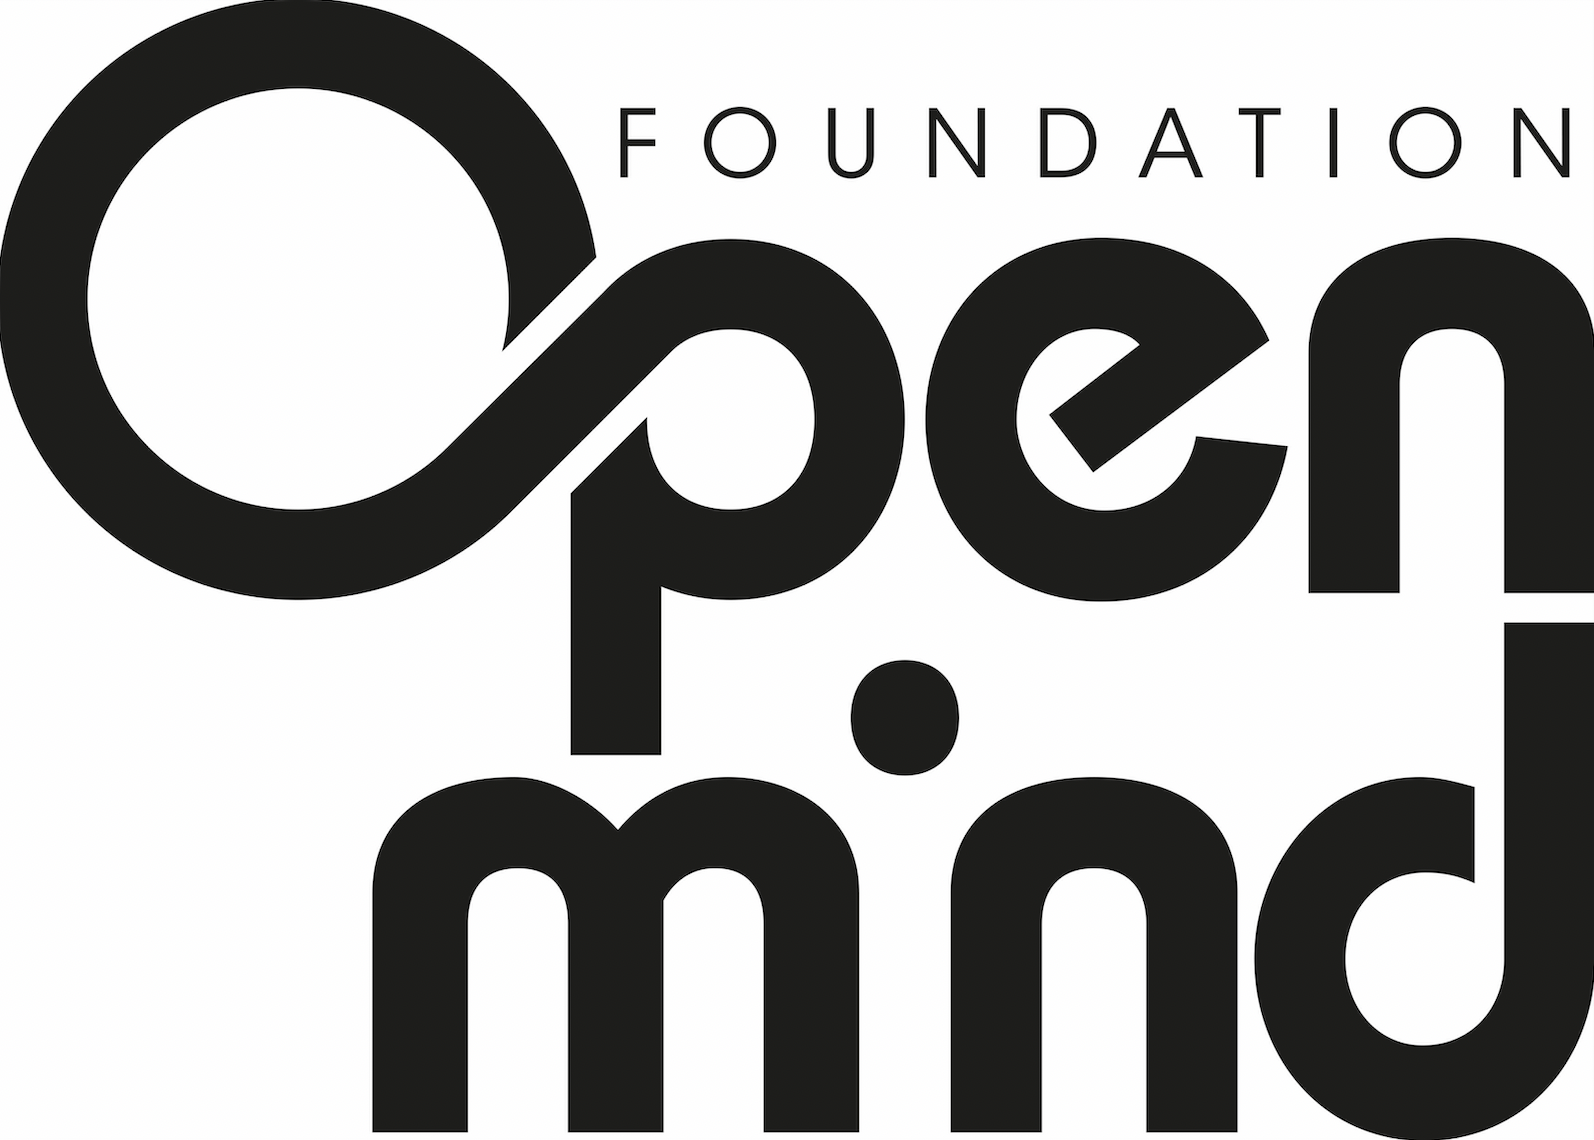 The Open Mind Foundation